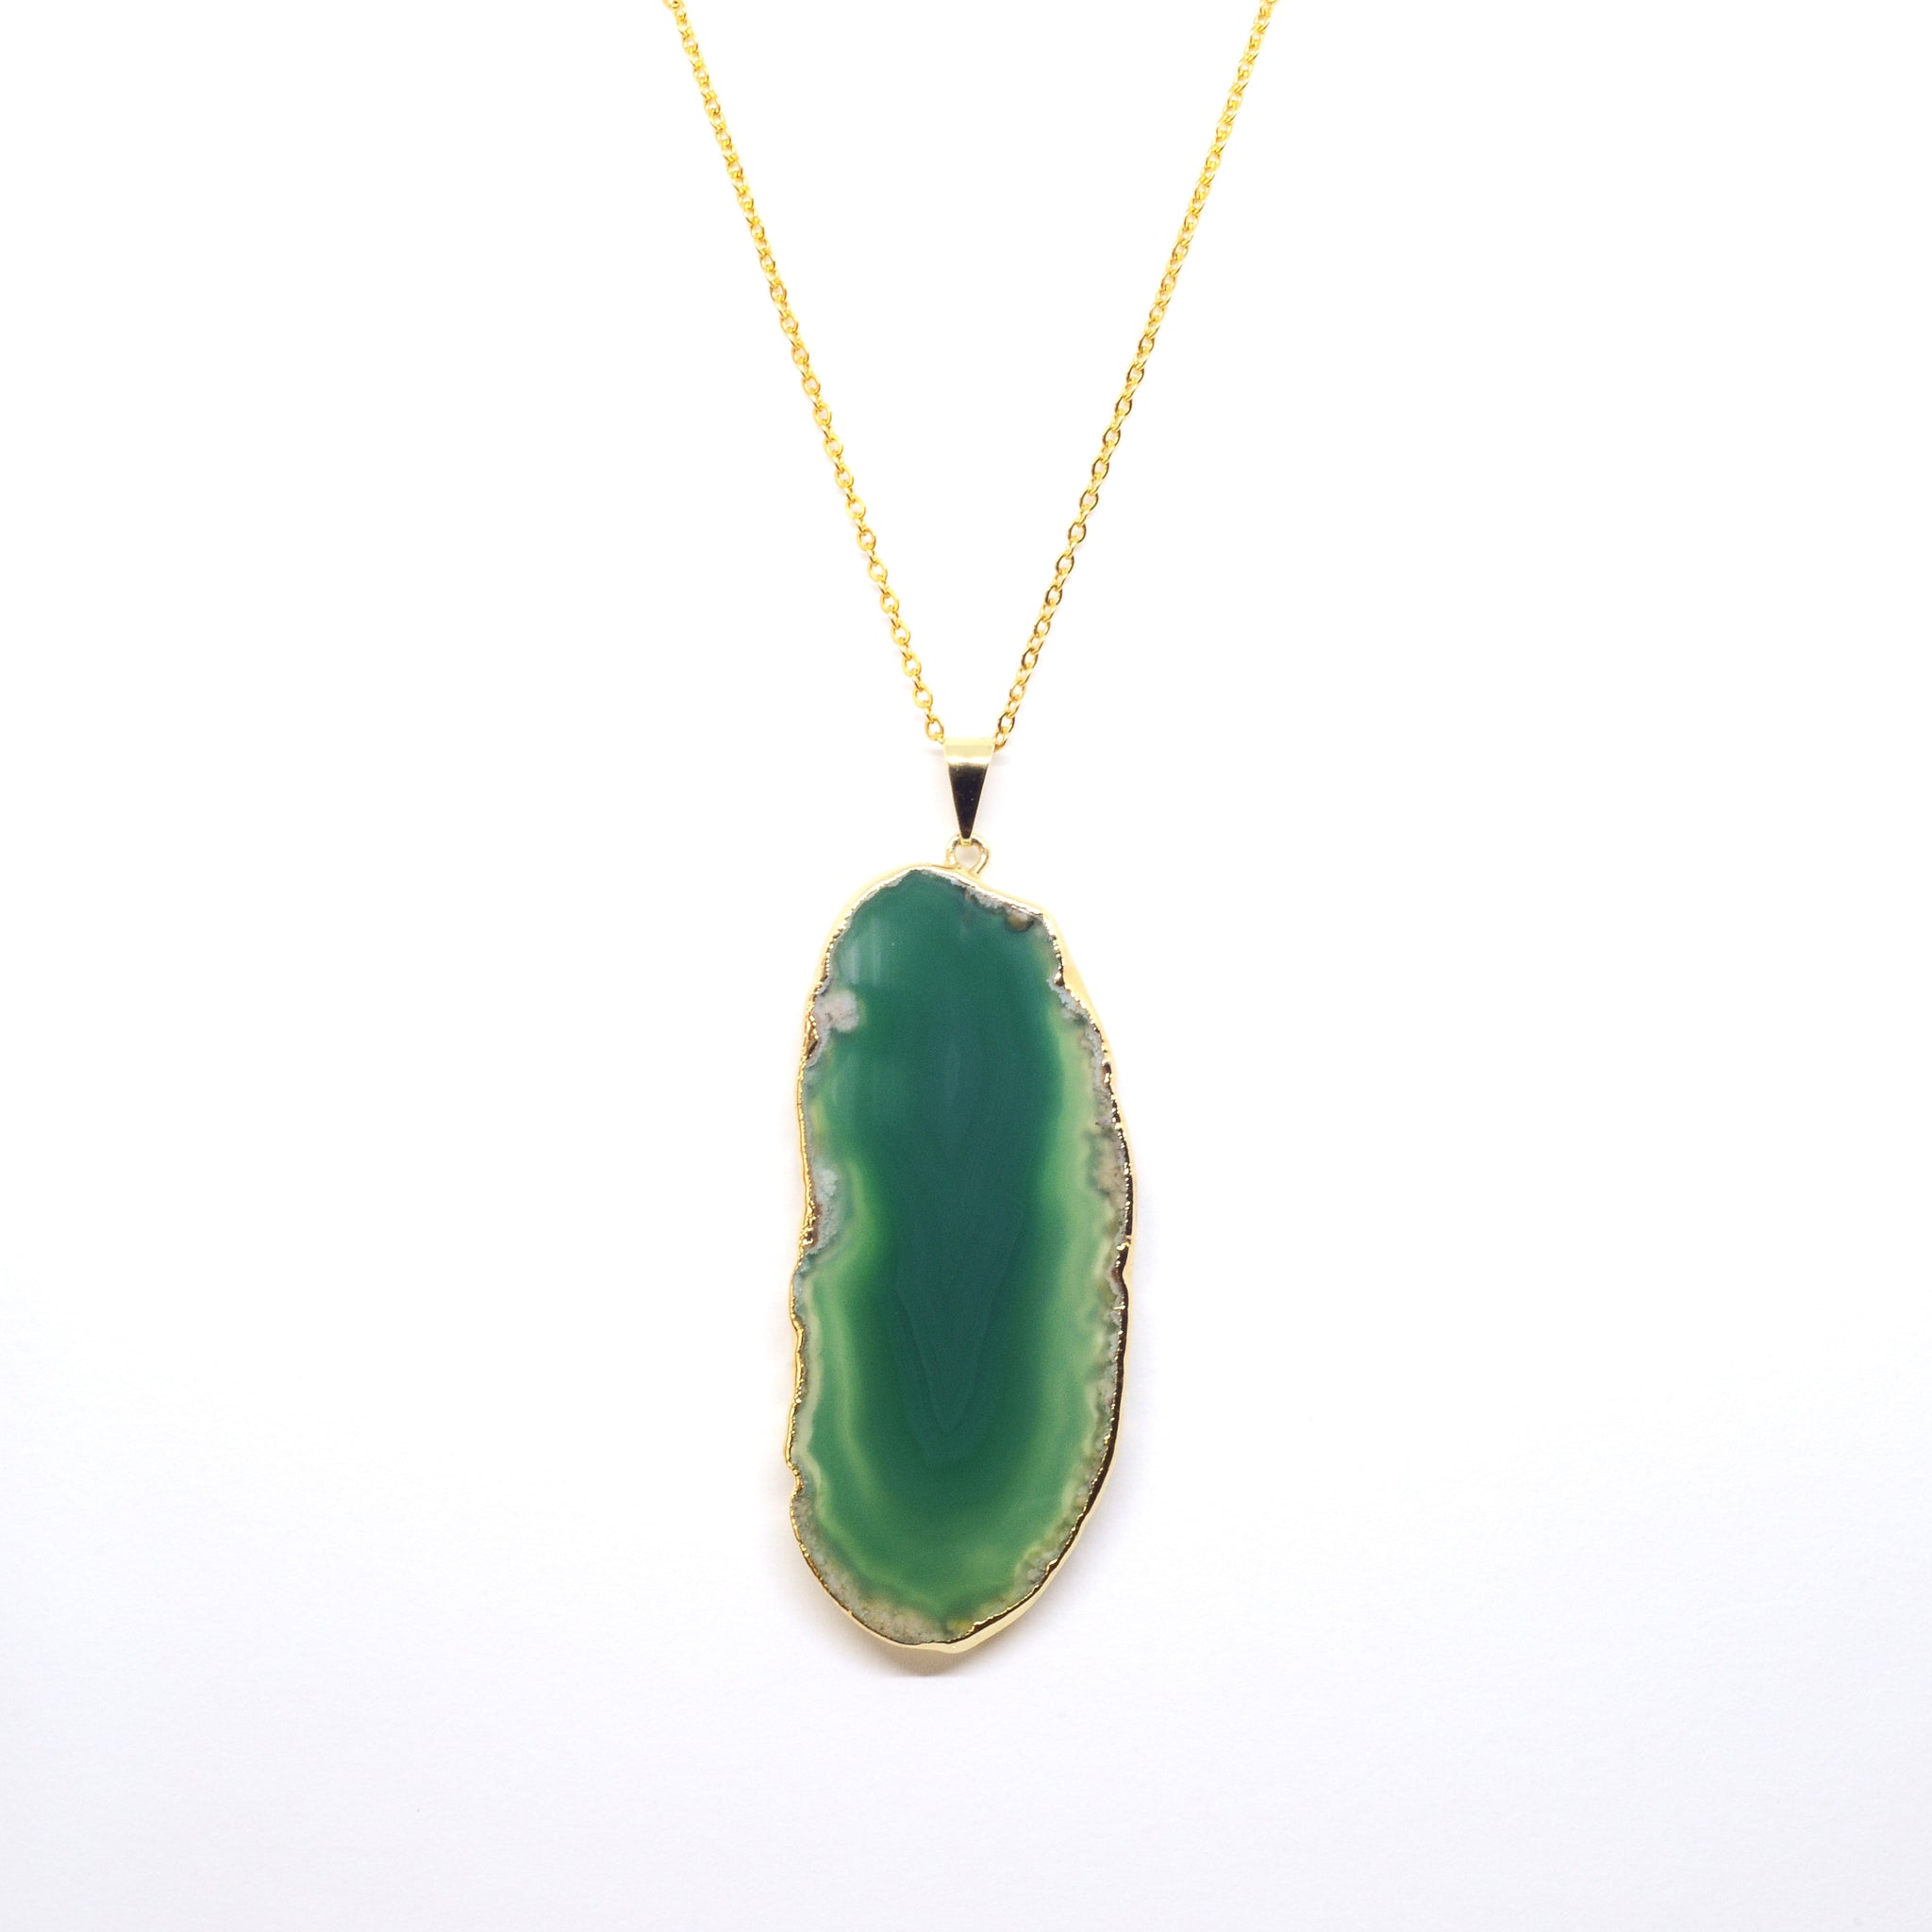 Necklace Green Agate Gold